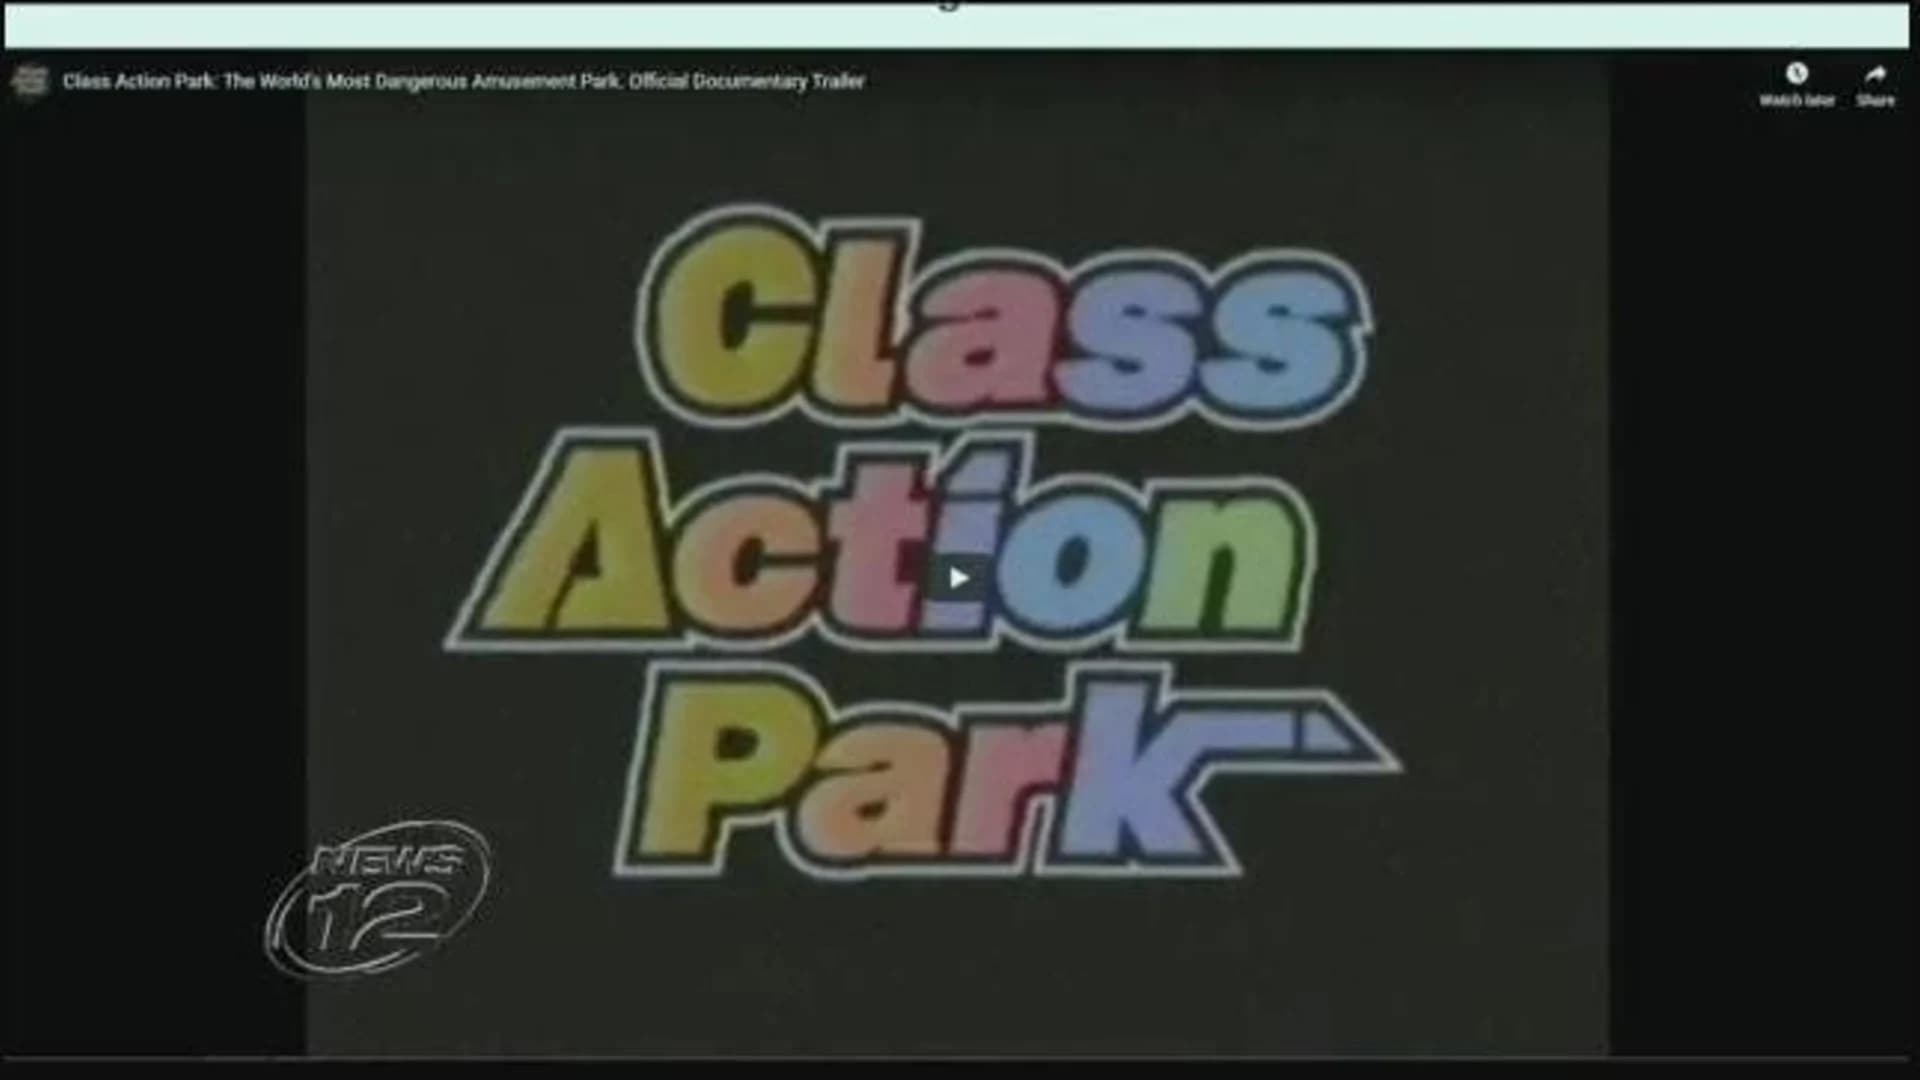 Action Park documentary ‘Class Action Park’ coming to HBO Max in August